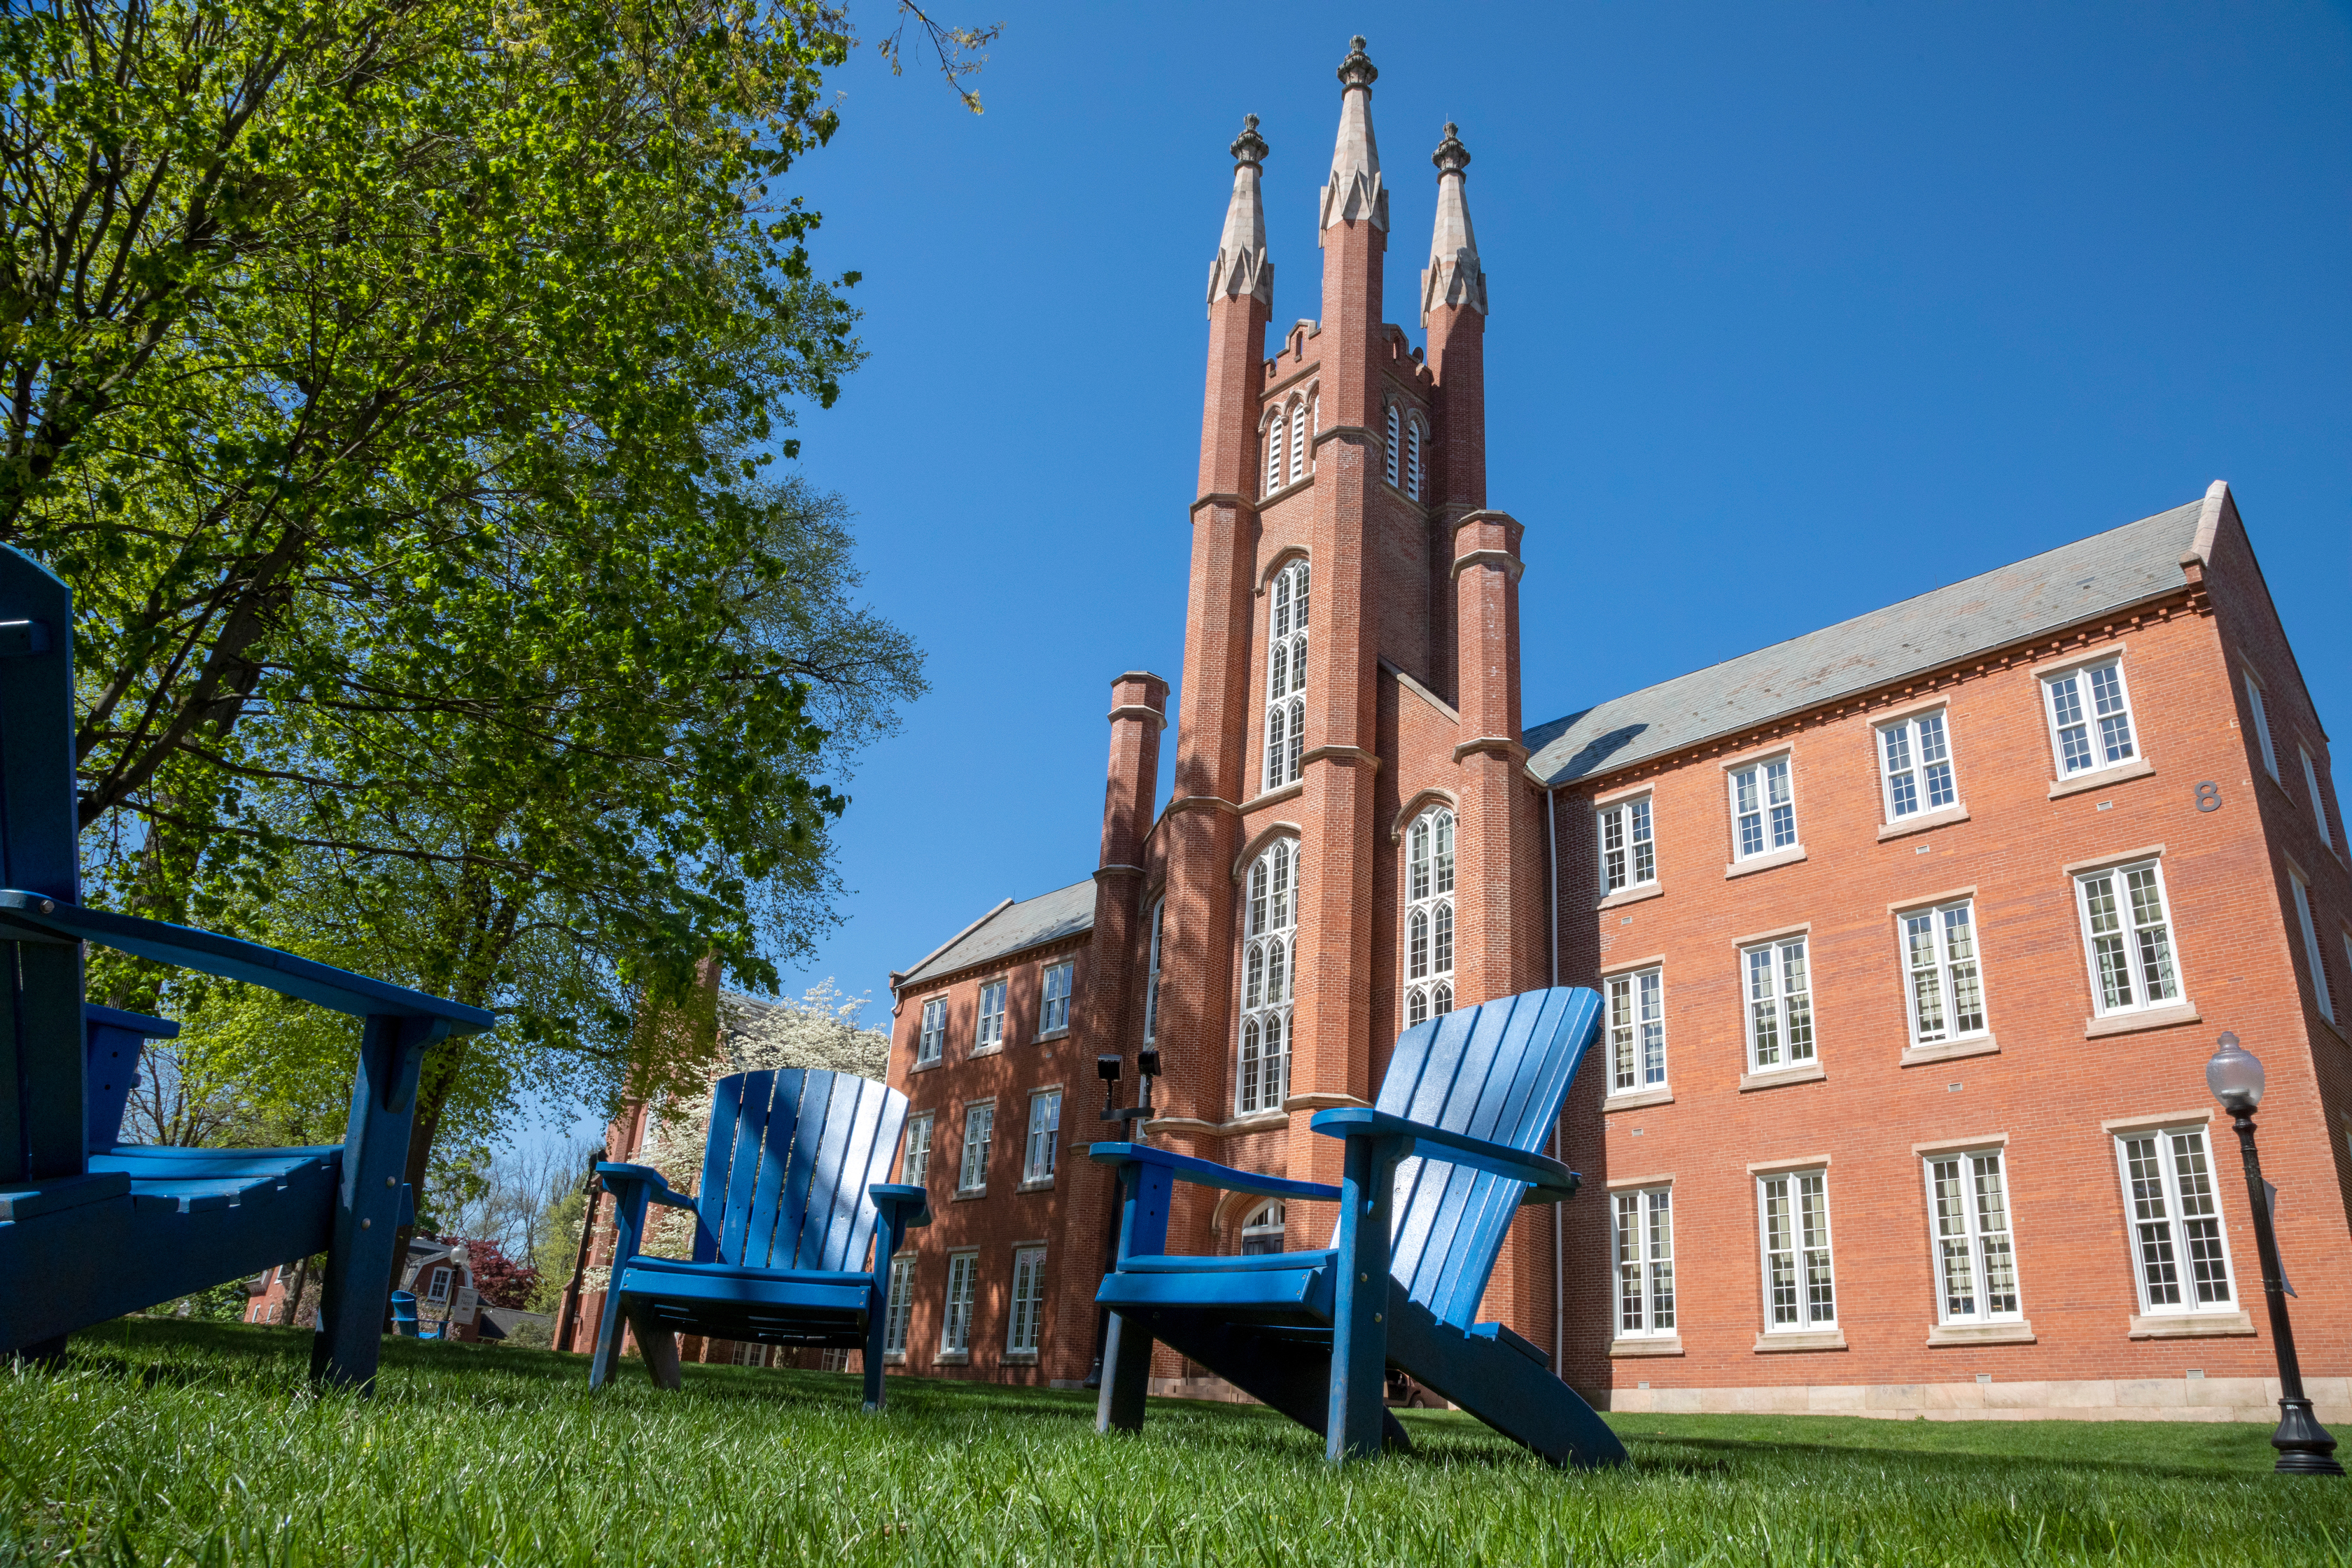 Franklin & Marshall College built in-person programs in England and China for students who could not travel to the institution's main campus in Lancaster, Pennsylvania.